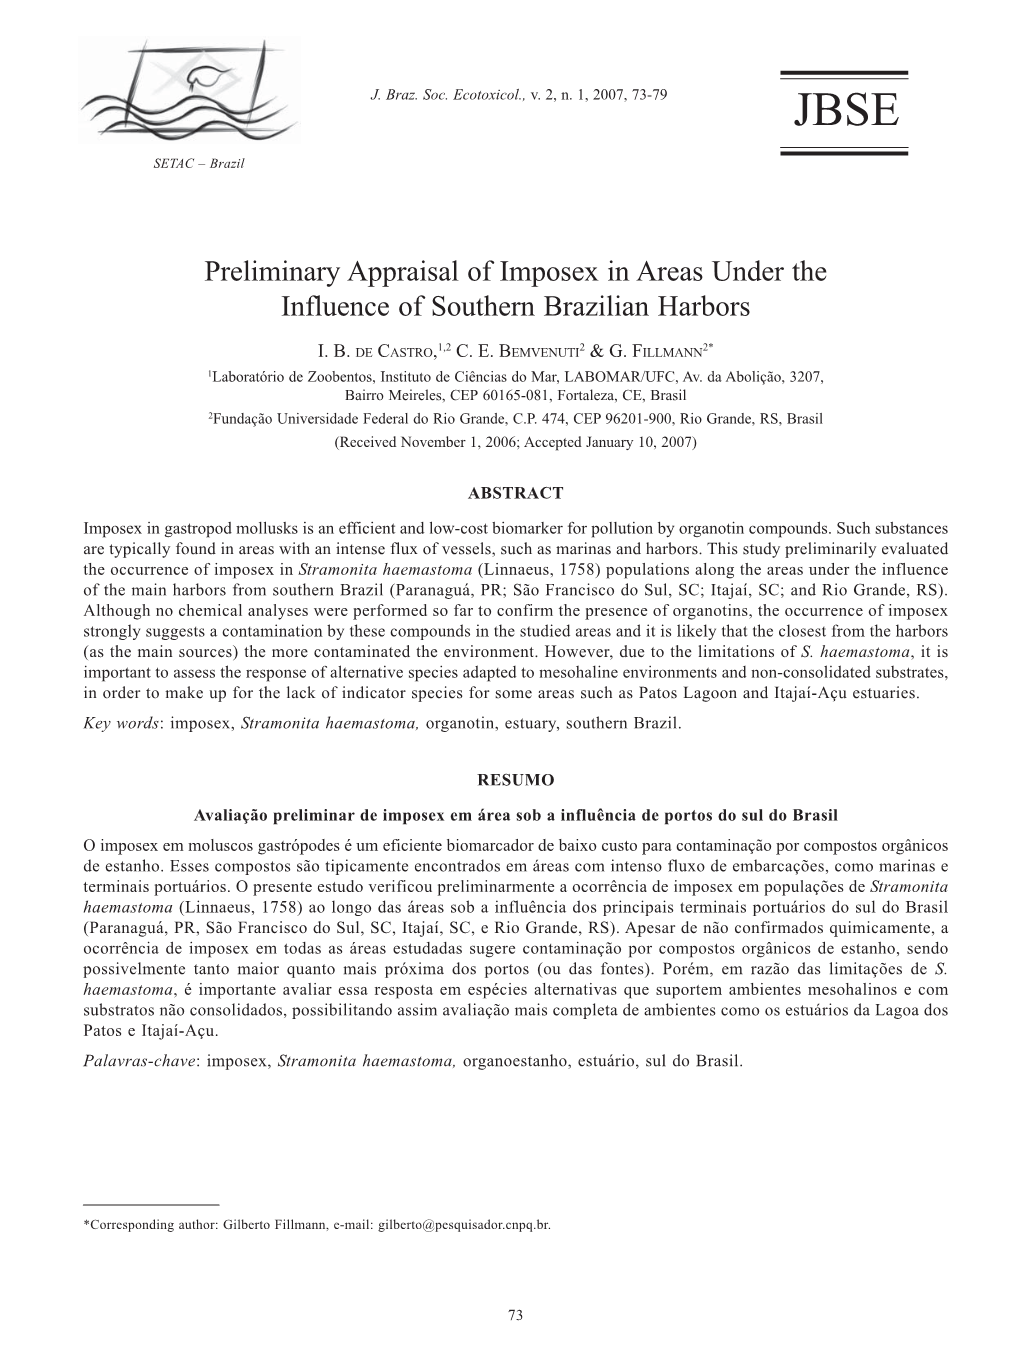 Preliminary Appraisal of Imposex in Areas Under the Influence of Southern Brazilian Harbors